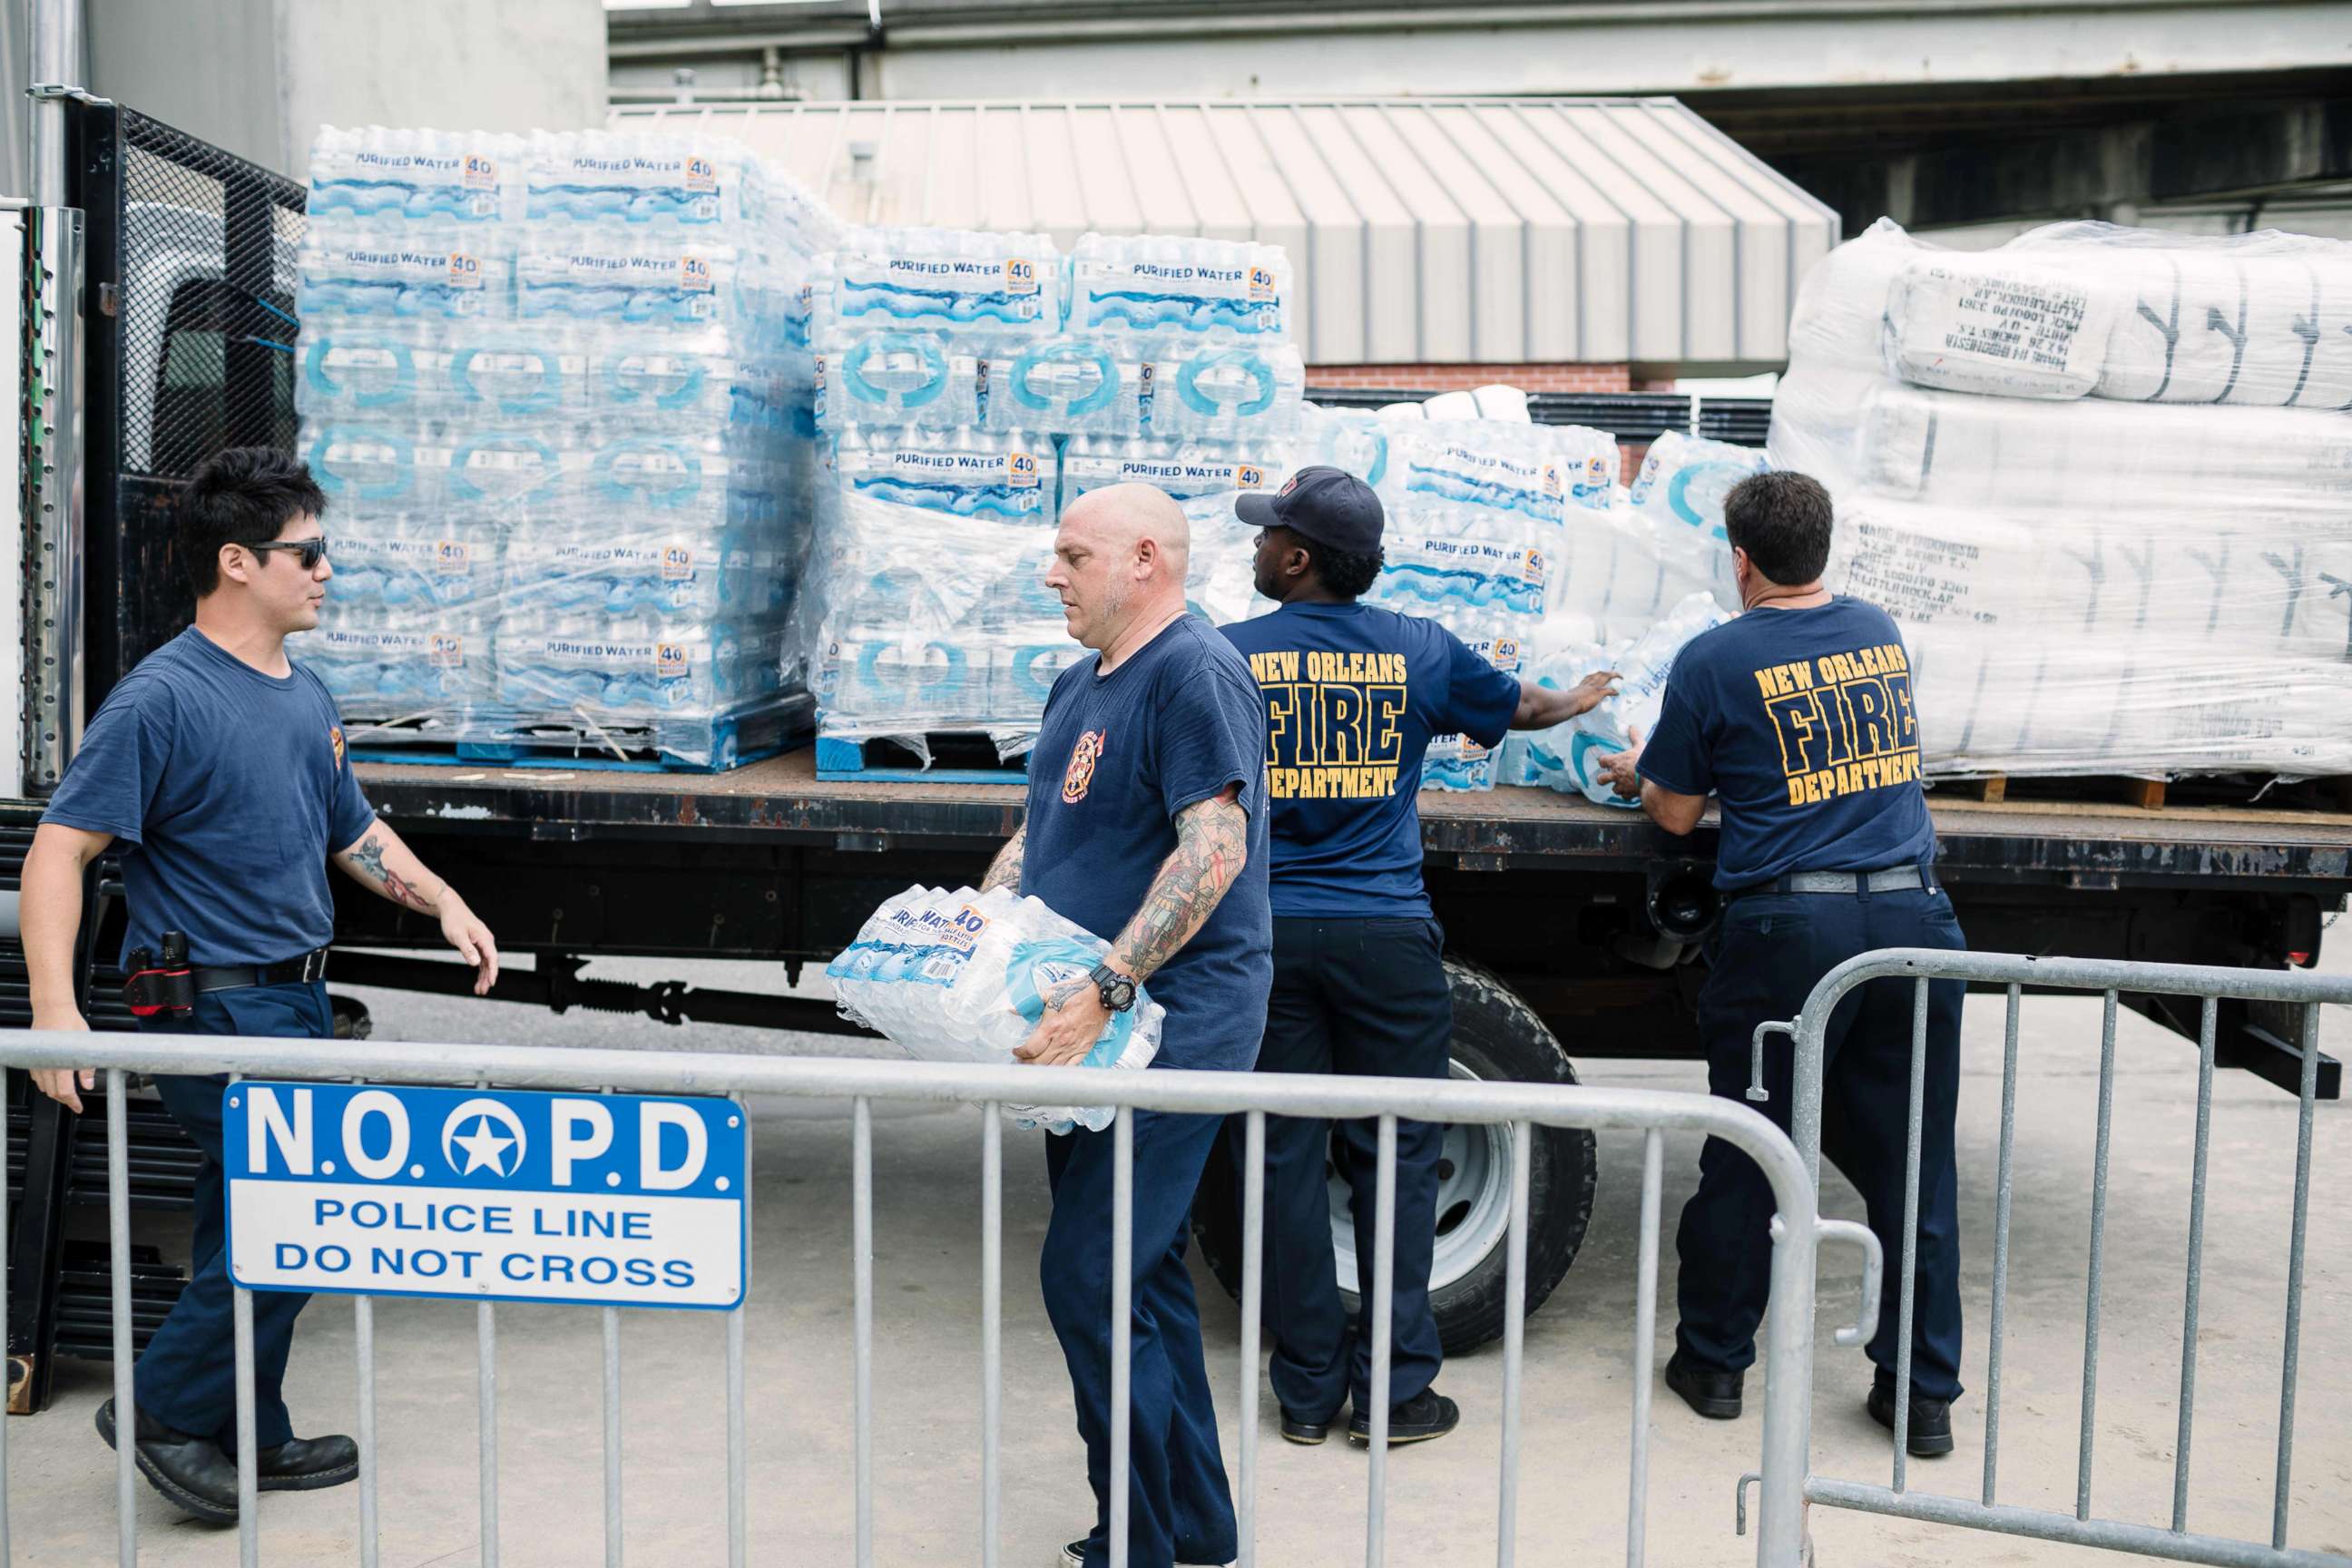 PHOTO: Firefighters Stan Ho (L) and Richard Jensen (C) unload supplies for the people of New Orleans in preparation of Hurricane Nate in New Orleans, Oct. 7, 2017.